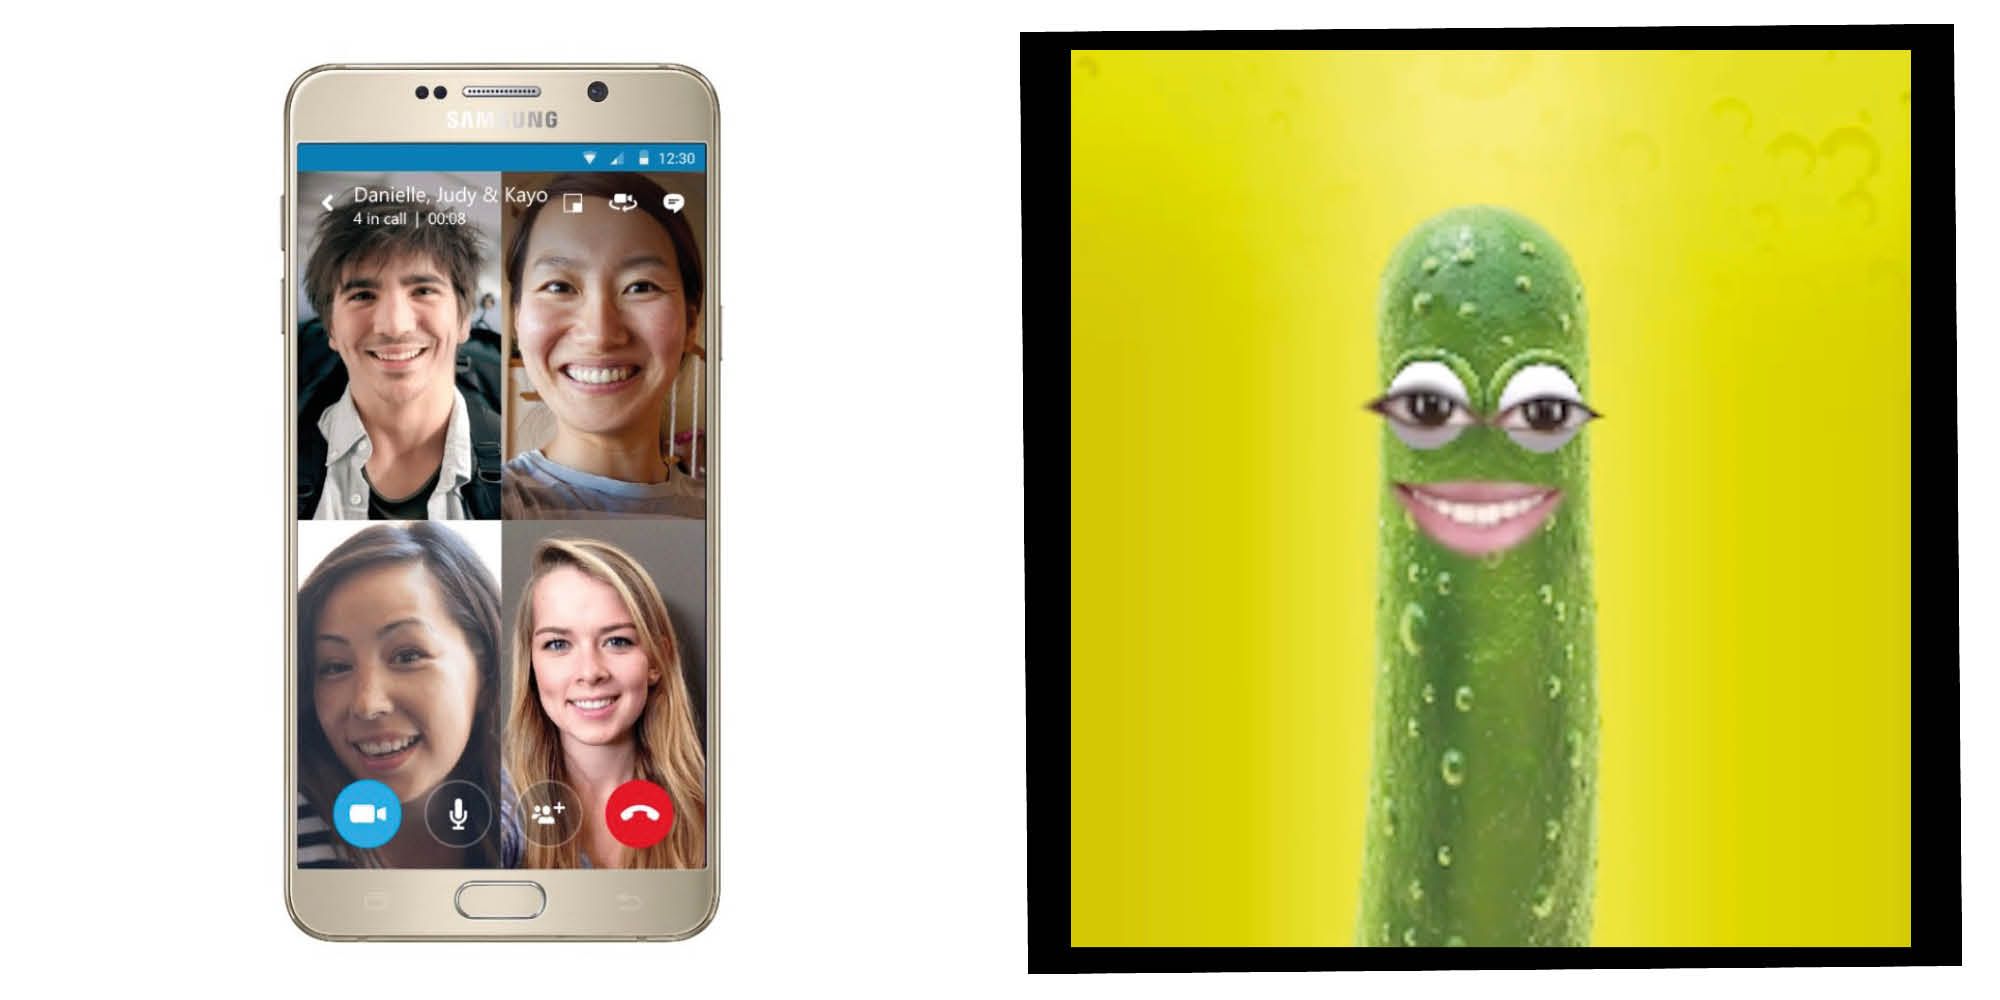 How To Get The Most Out Of Video Call Apps So You Can Have All The Fun With Friends And Family